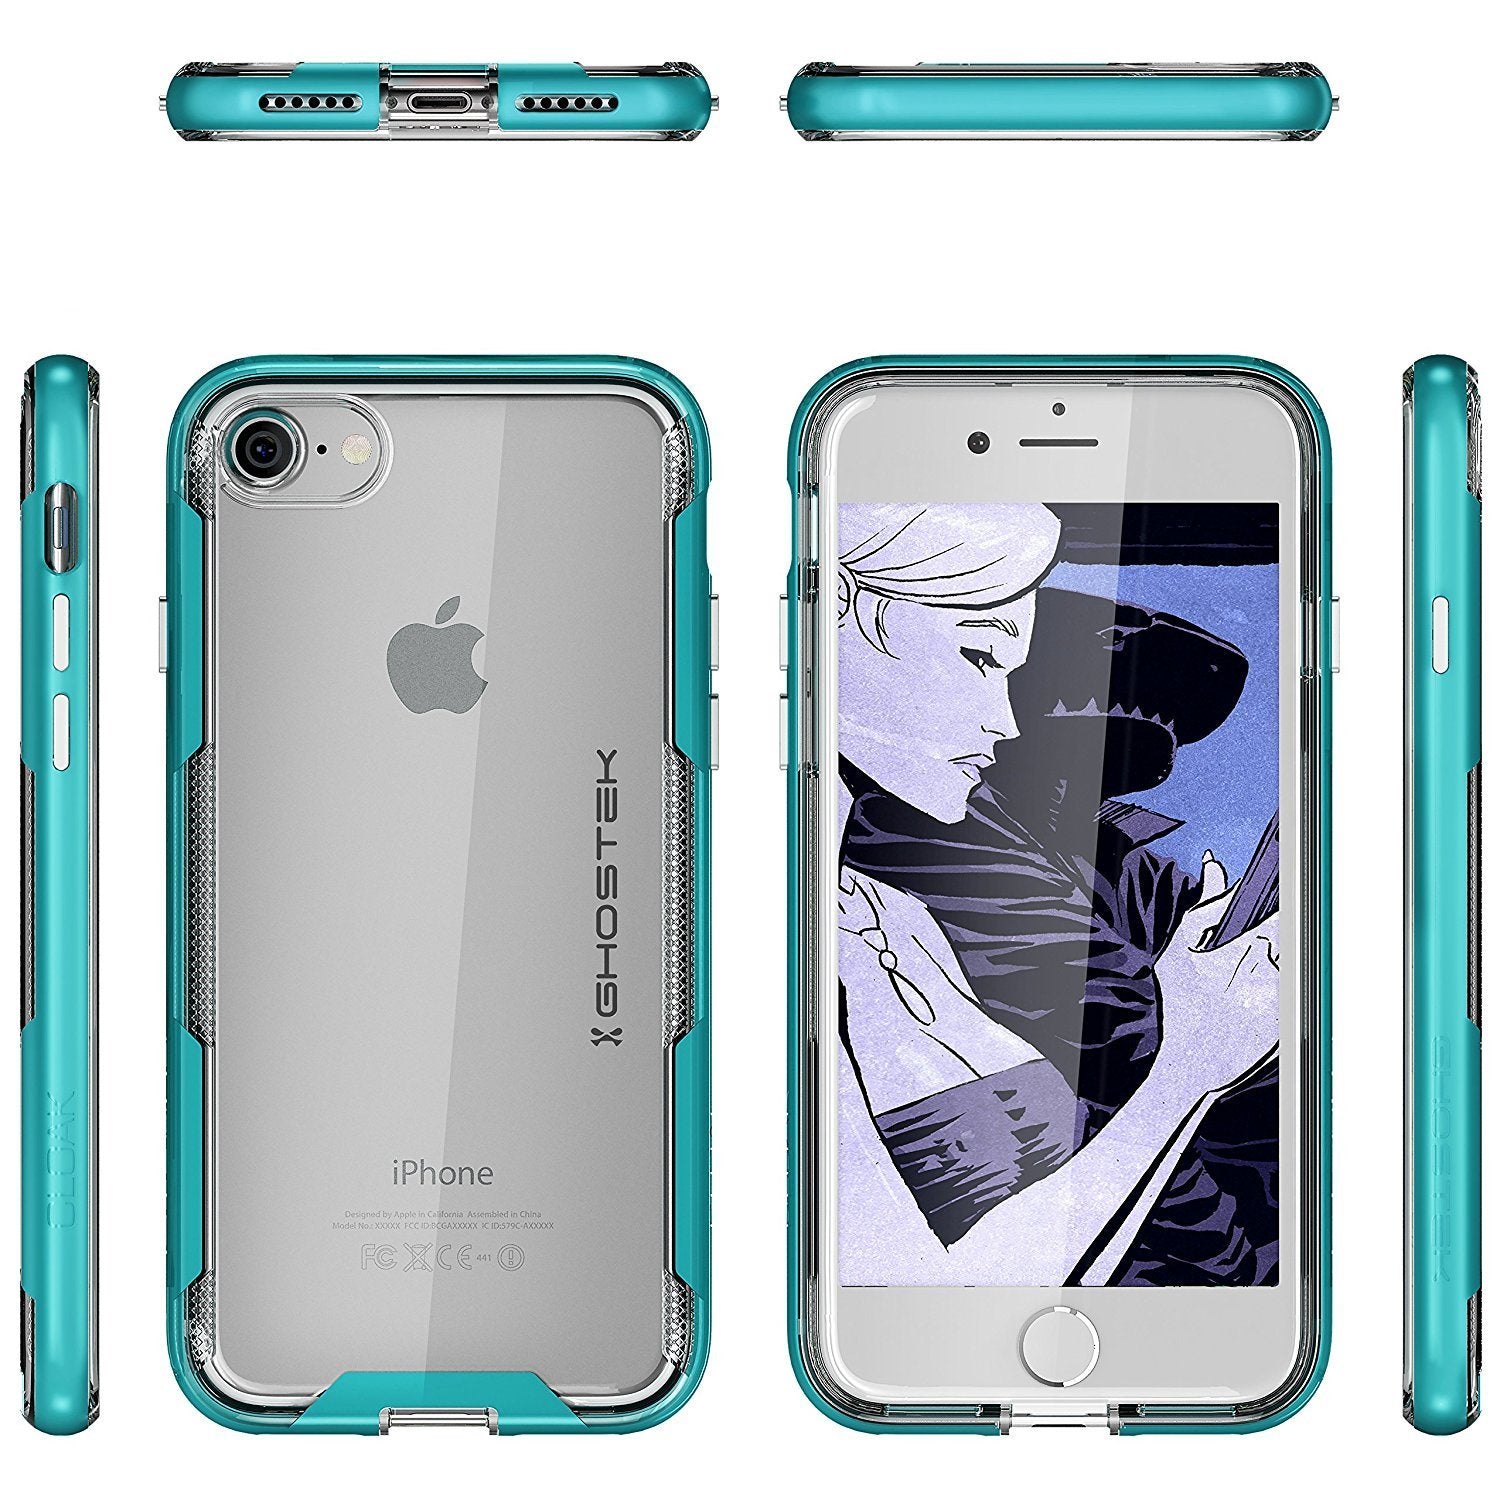 iPhone 7 Case, Ghostek Cloak 3 Series for iPhone 7 Clear Protective Case | Teal